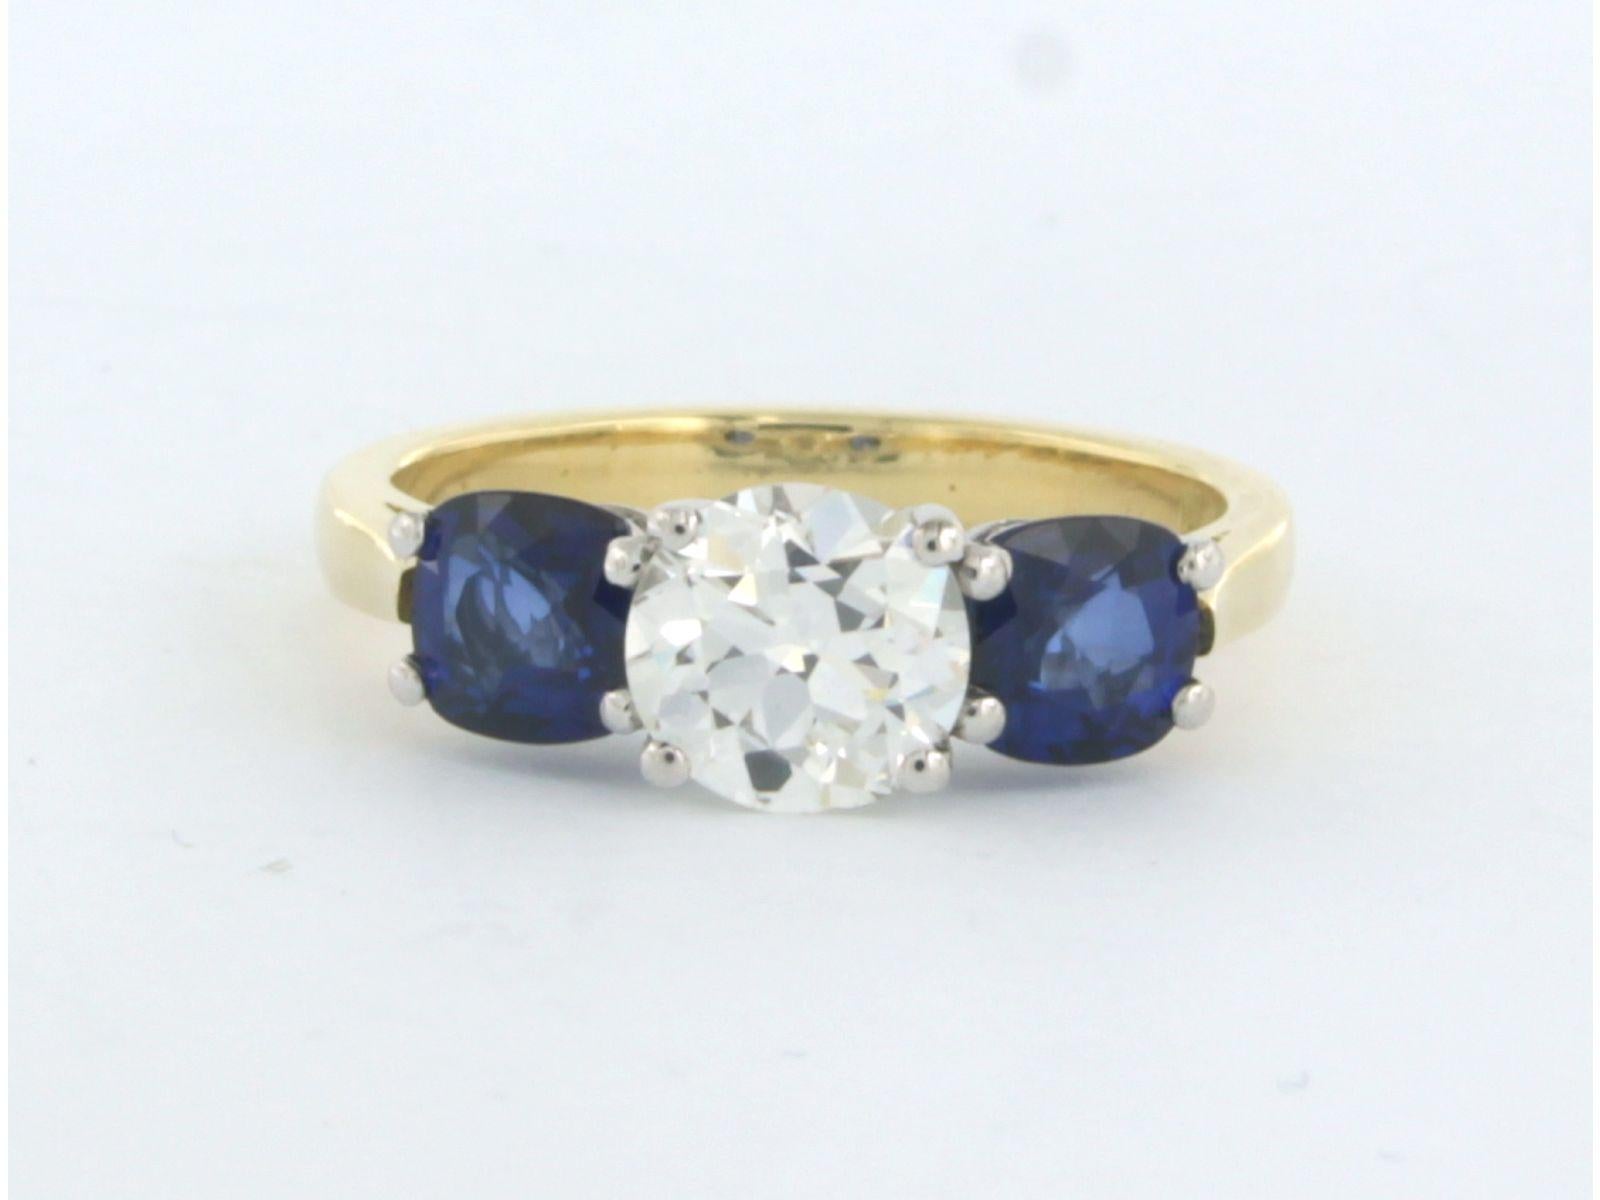 18k bicolor gold ring with an old European cut diamond in the center. 1.10ct - J/K - US - and cushion cut sapphire 1.42ct - ring size US. 6.75 - EU. 17.25 (54)

detailed description:

the top of the ring is 6.5 mm wide by 6.6 mm high

ring size US